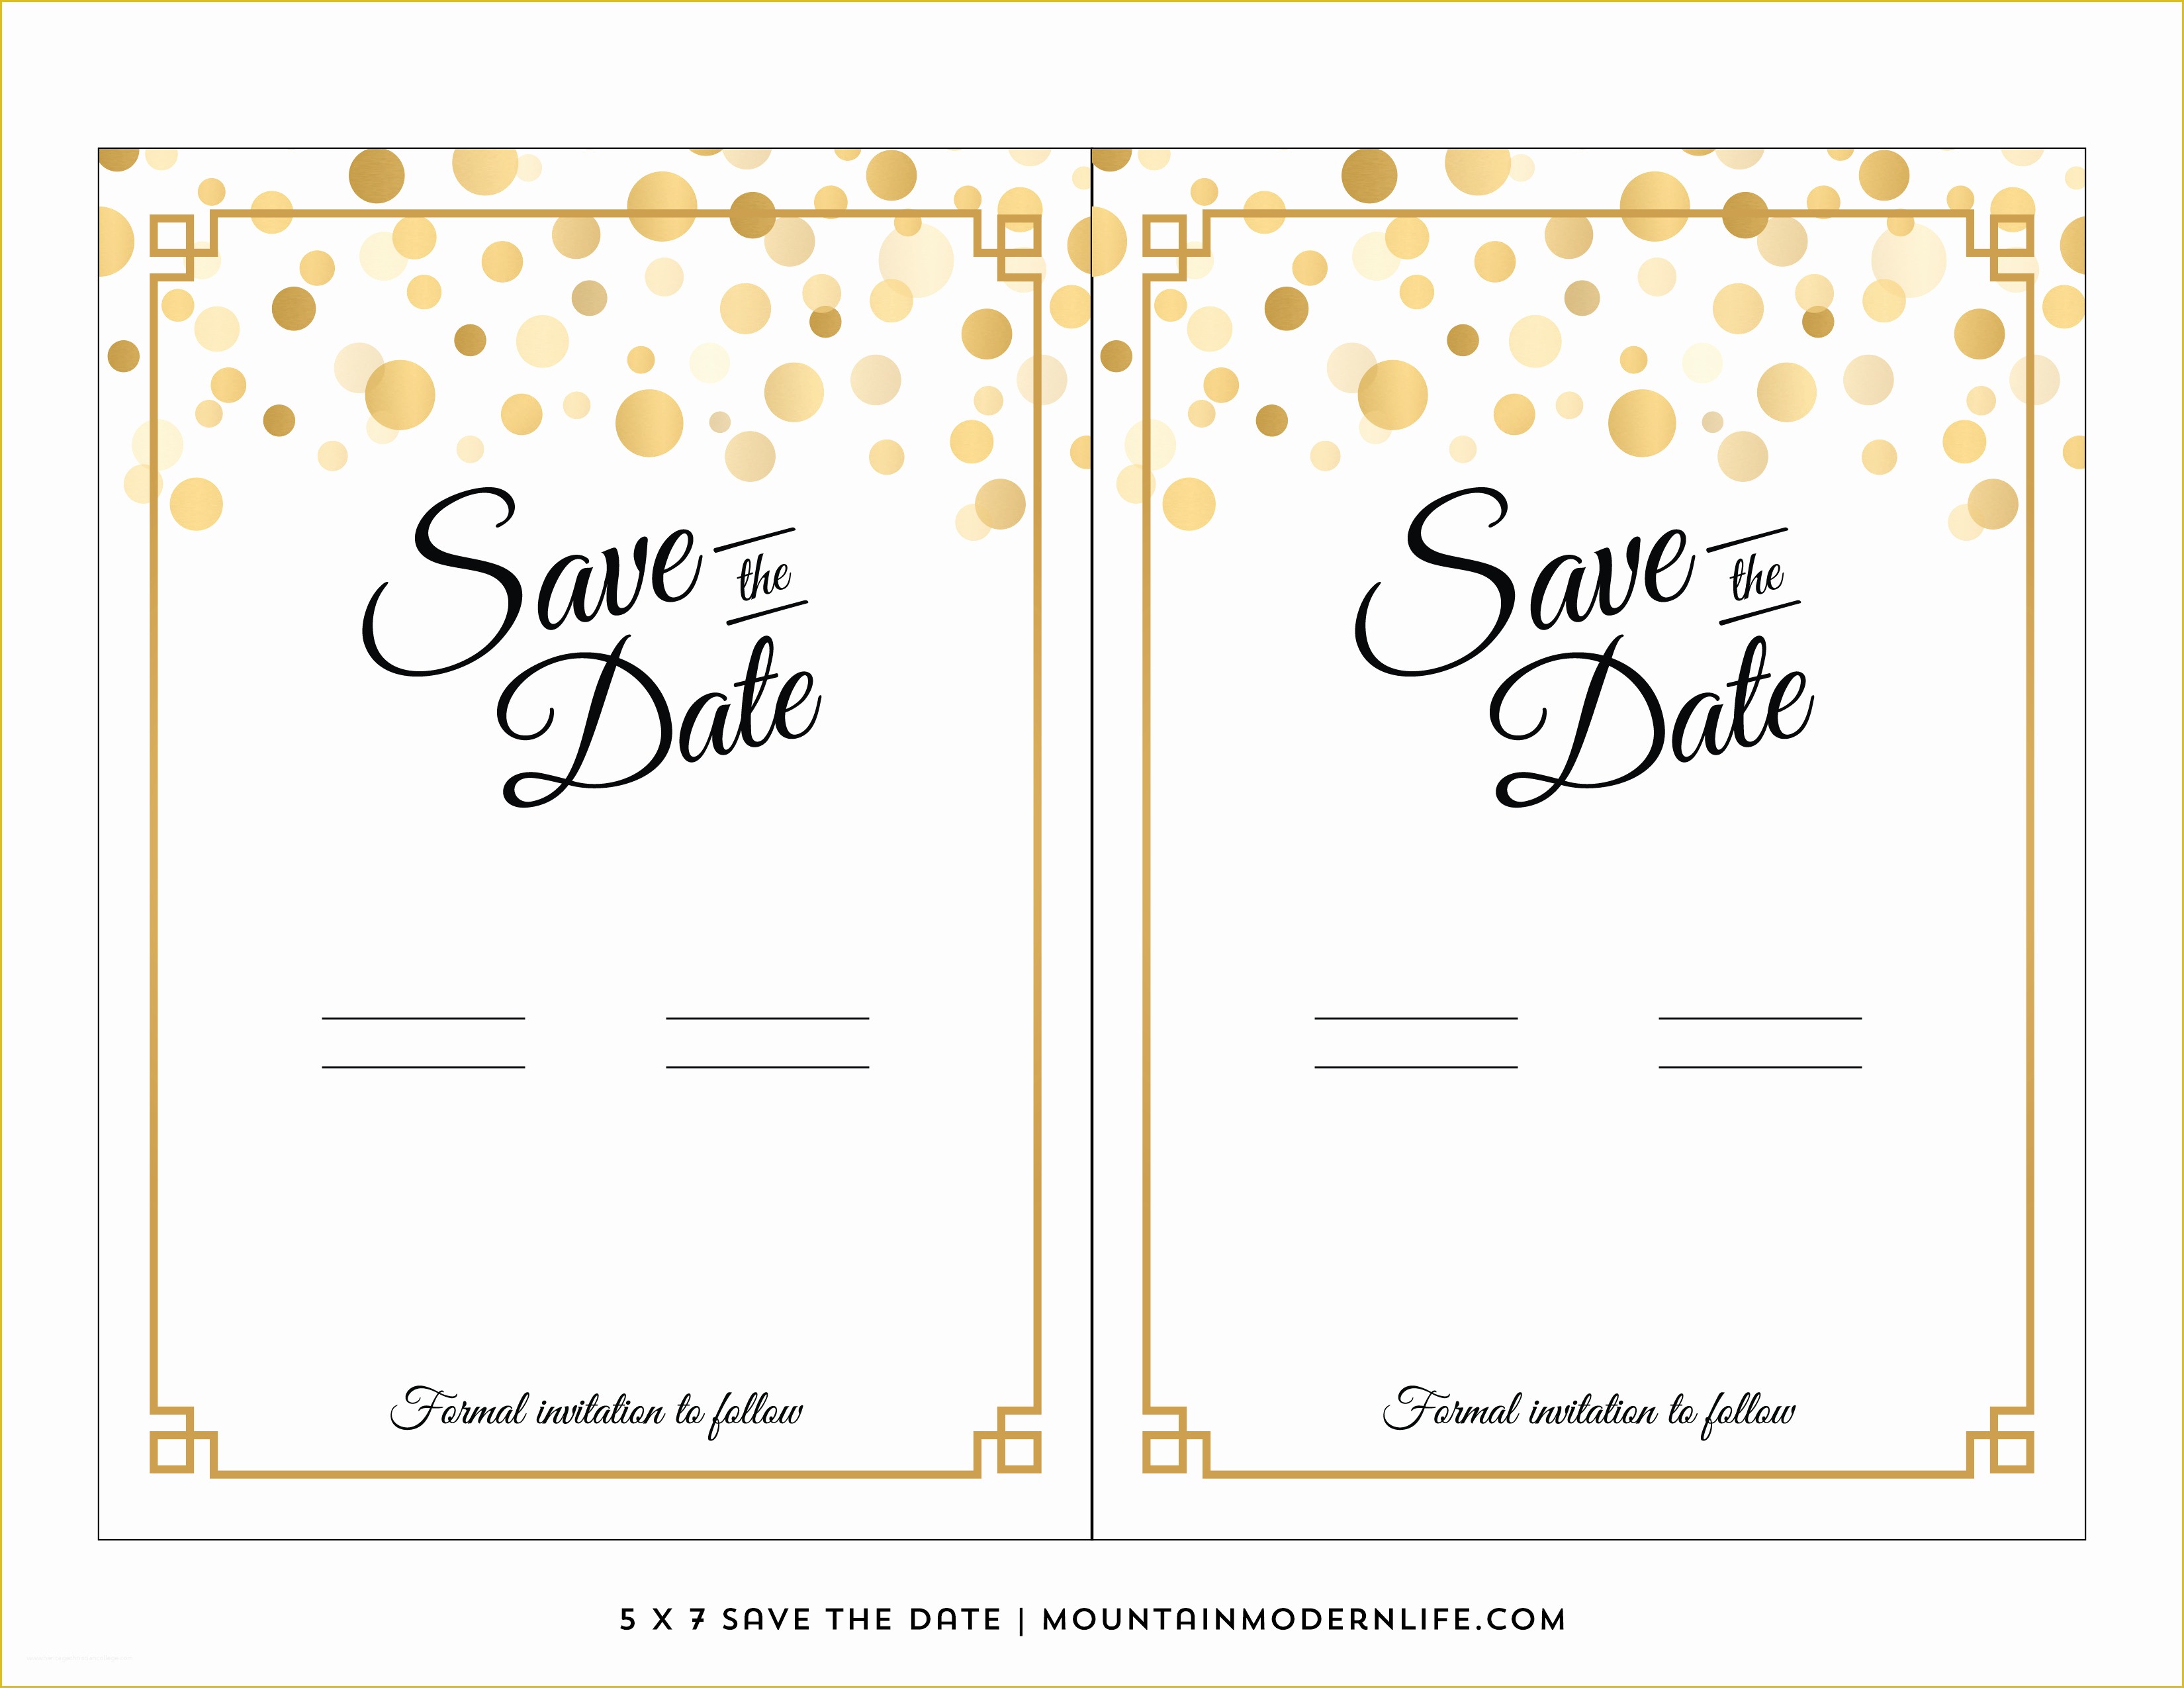 Free Save the Date Holiday Party Templates Of Template Free Templates Save the Date Template Save the